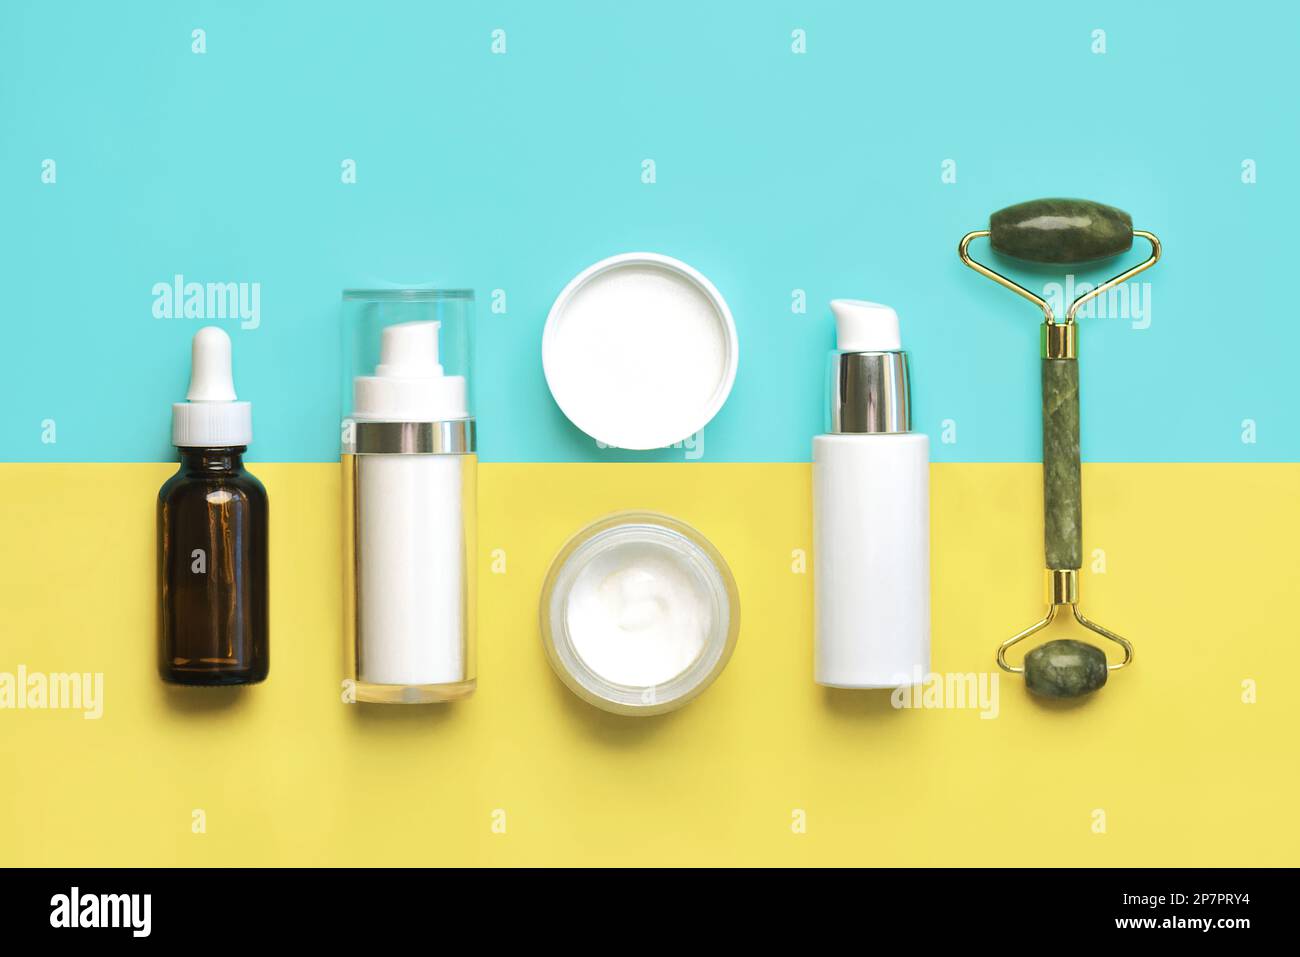 Set of cosmetics and jade massanger roller for skin care over blue and yellow background. Skin care products concept Stock Photo